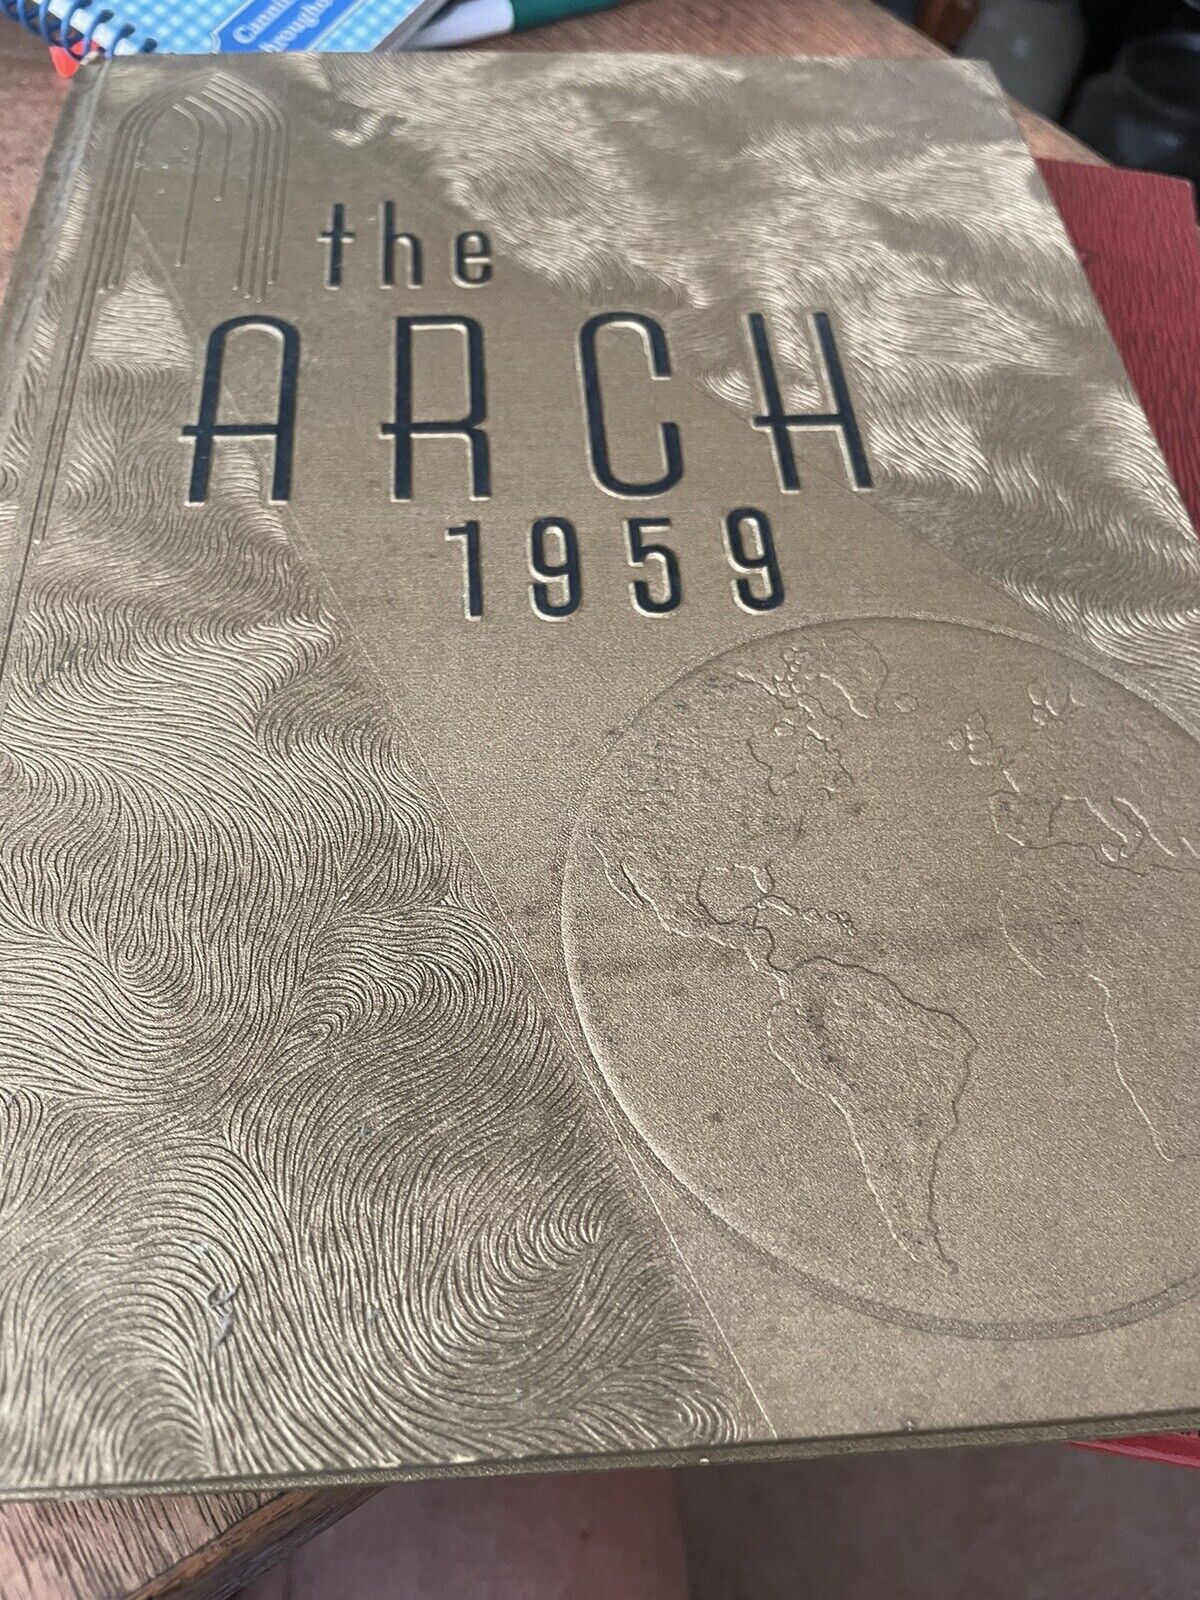 THE ARCH 1959 WV STATE COLLEGE YEARBOOK HBCU